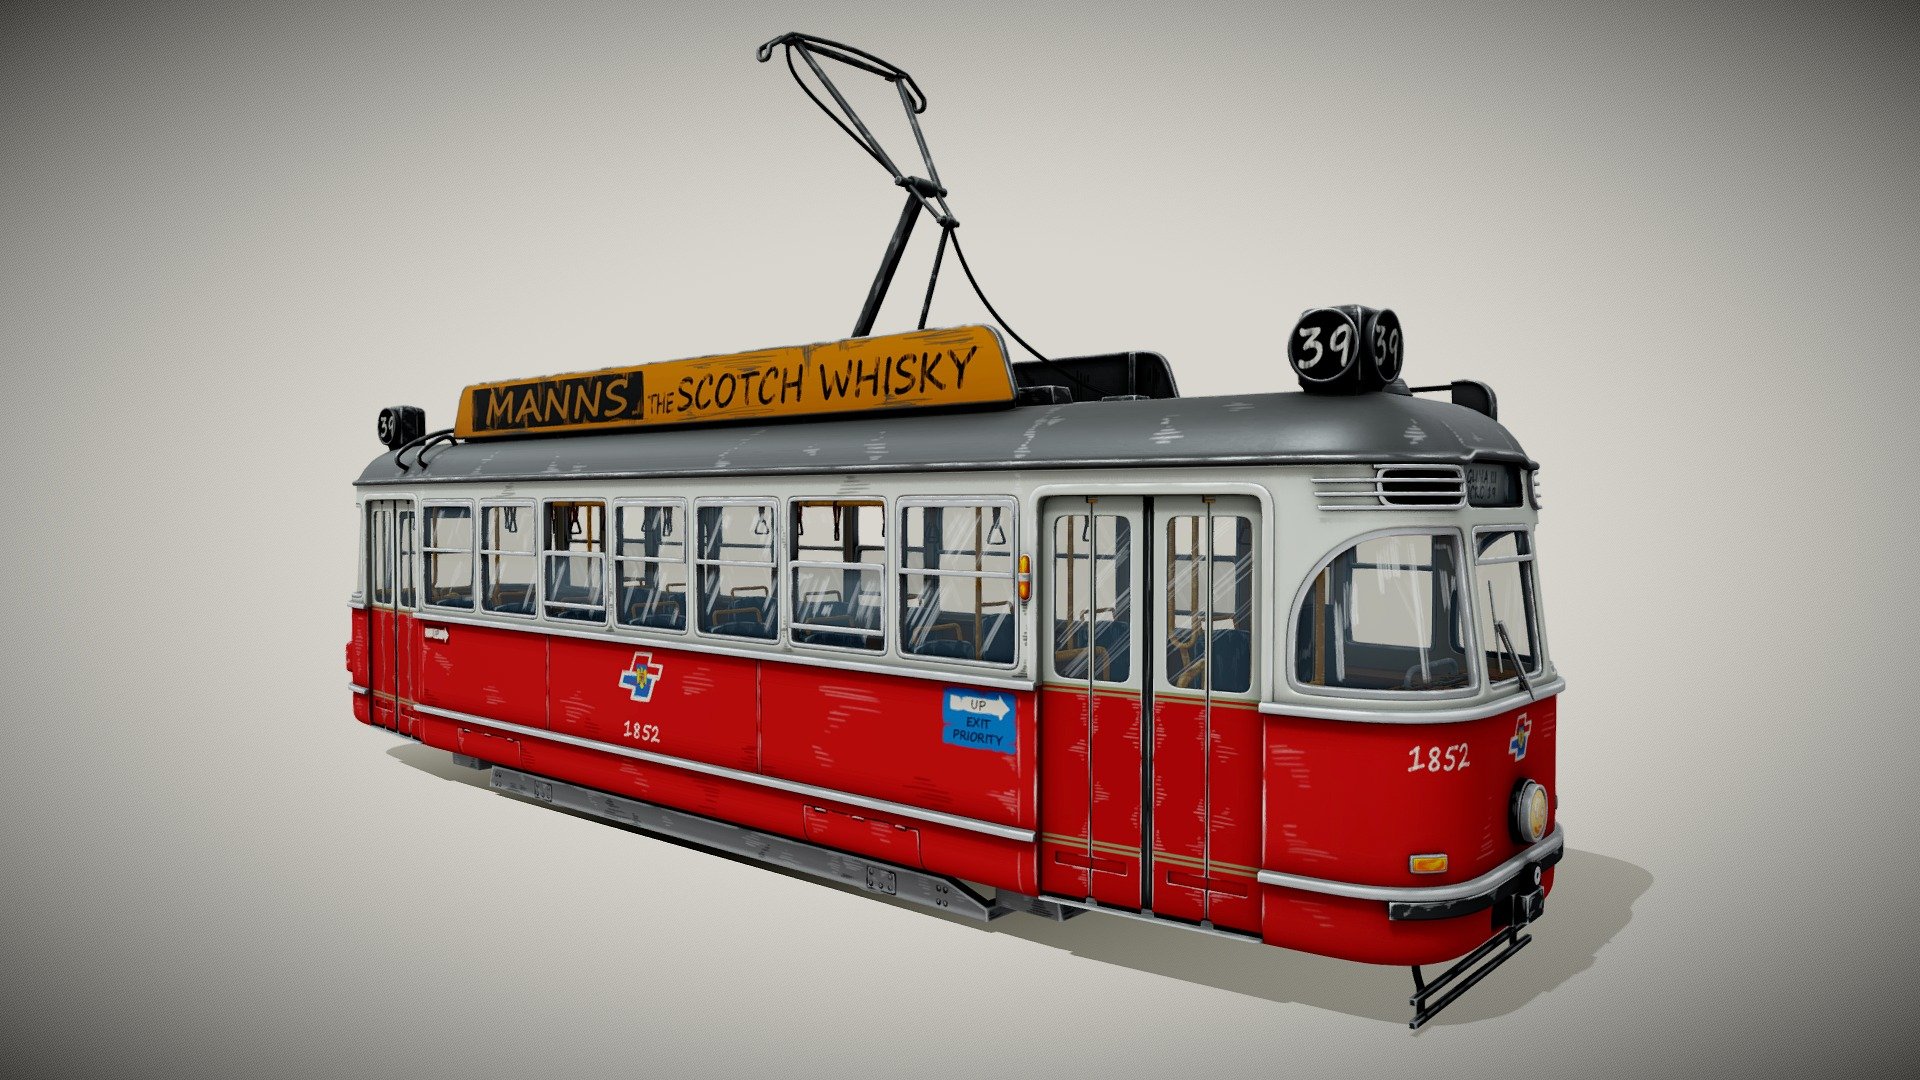 Stylized model of a tram from the classic era. Model comes with normal maps and diffuse. I din`t use metalness or roughness maps, just values. Interior is modelled also. 4x 4096 pixels main textures with 2x 2048 normal maps and 4x smaller textures for posters and windows. I included also the psd files of the textures and the max file 3d model